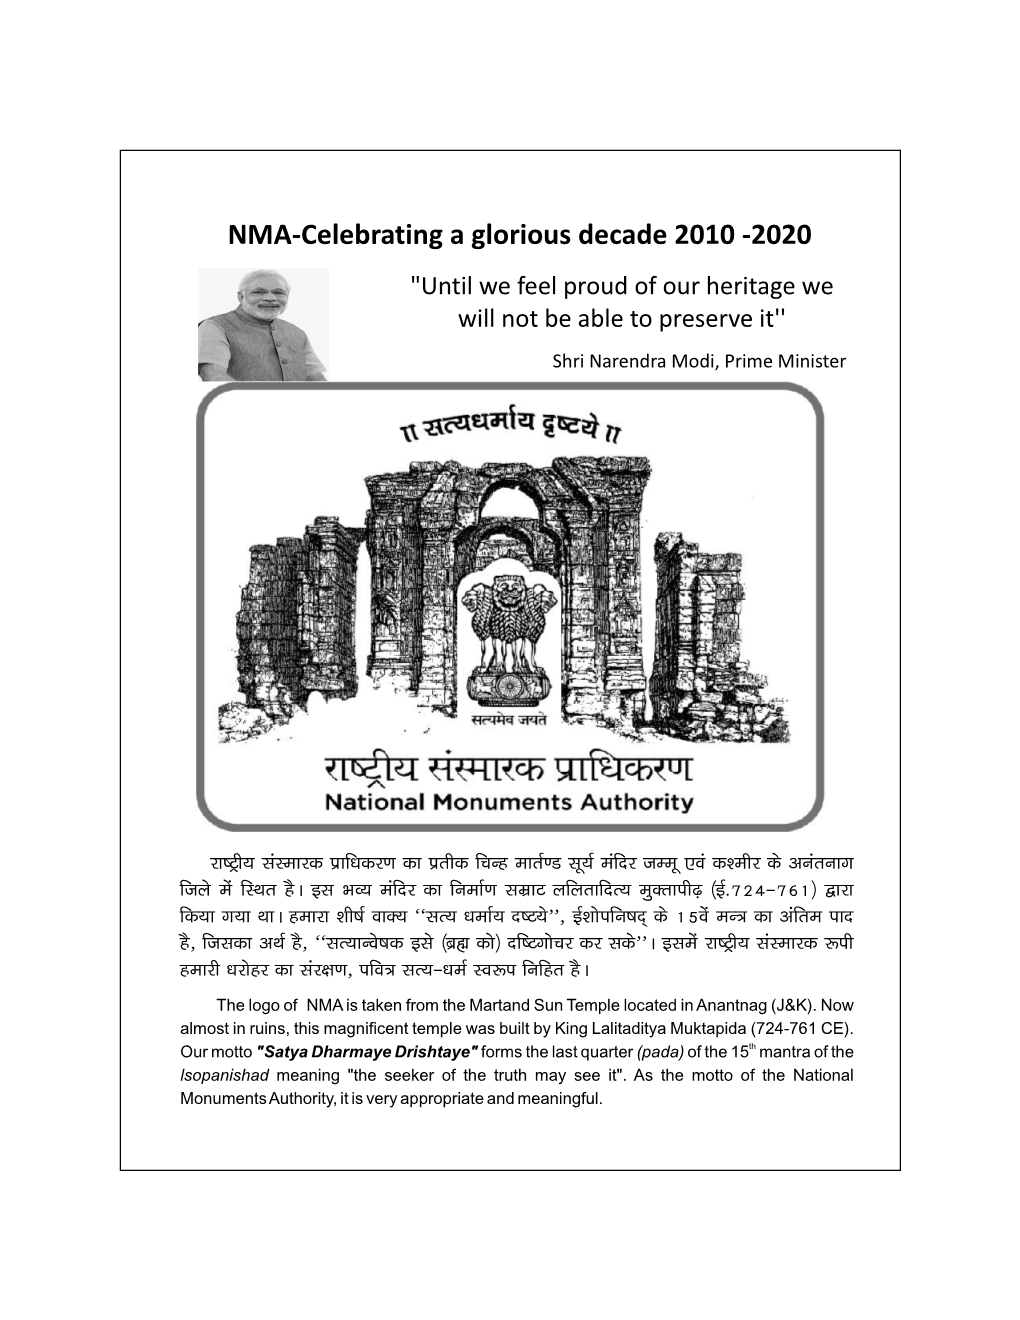 NMA-Celebrating a Glorious Decade 2010 -2020 "Until We Feel Proud of Our Heritage We Will Not Be Able to Preserve It'' Shri Narendra Modi, Prime Minister